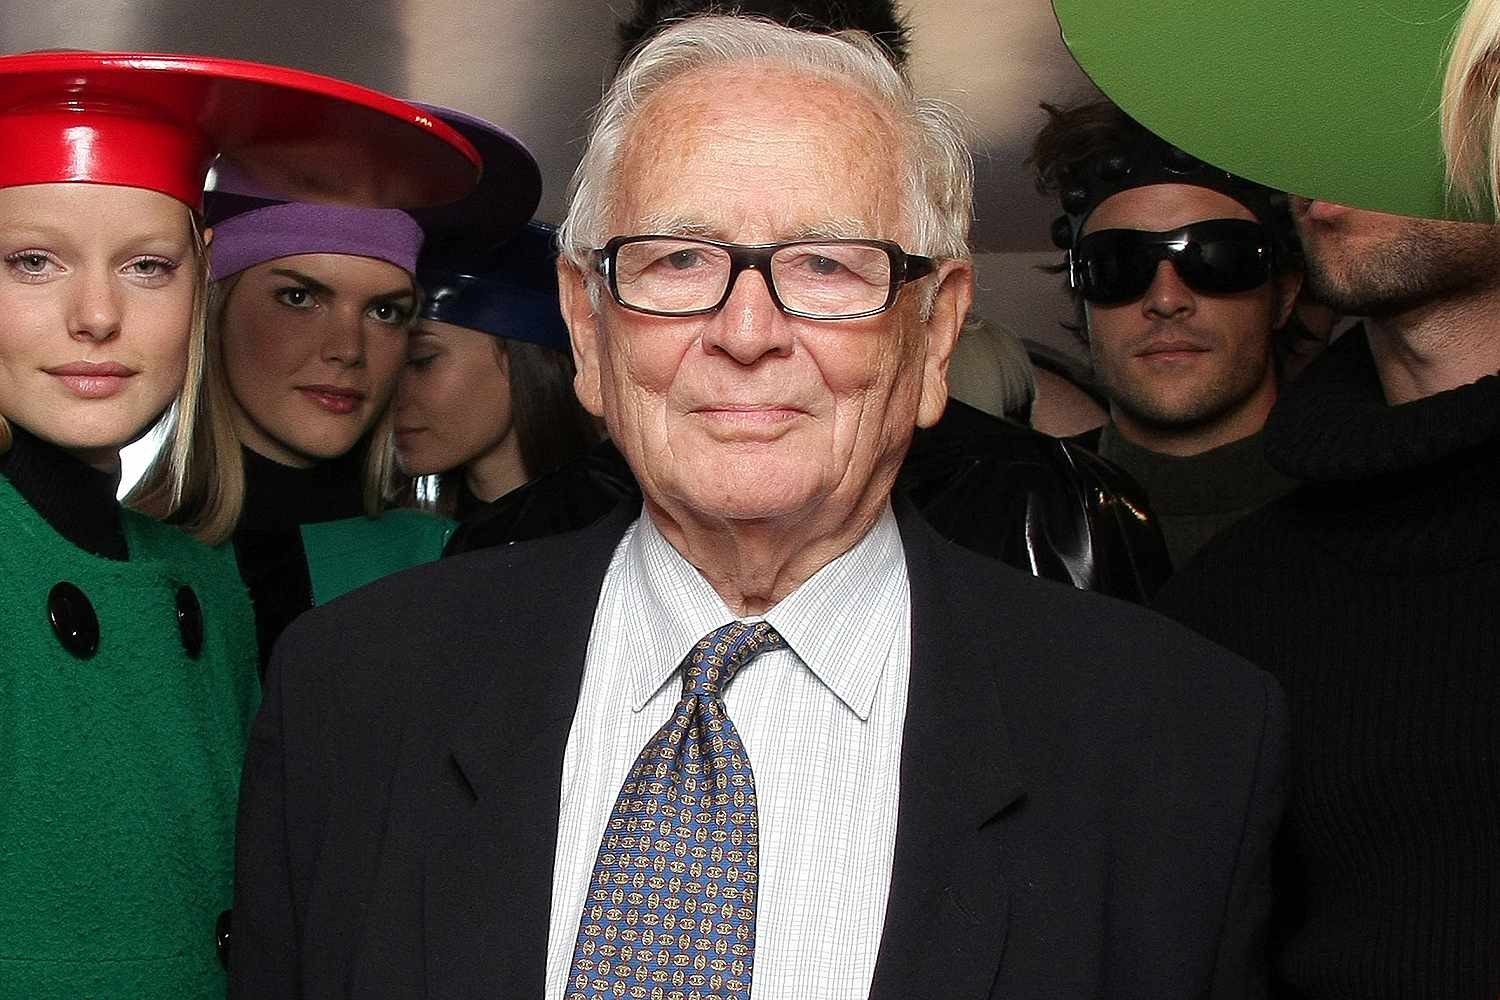 Top 12 Best & Famous Fashion Designers in the World